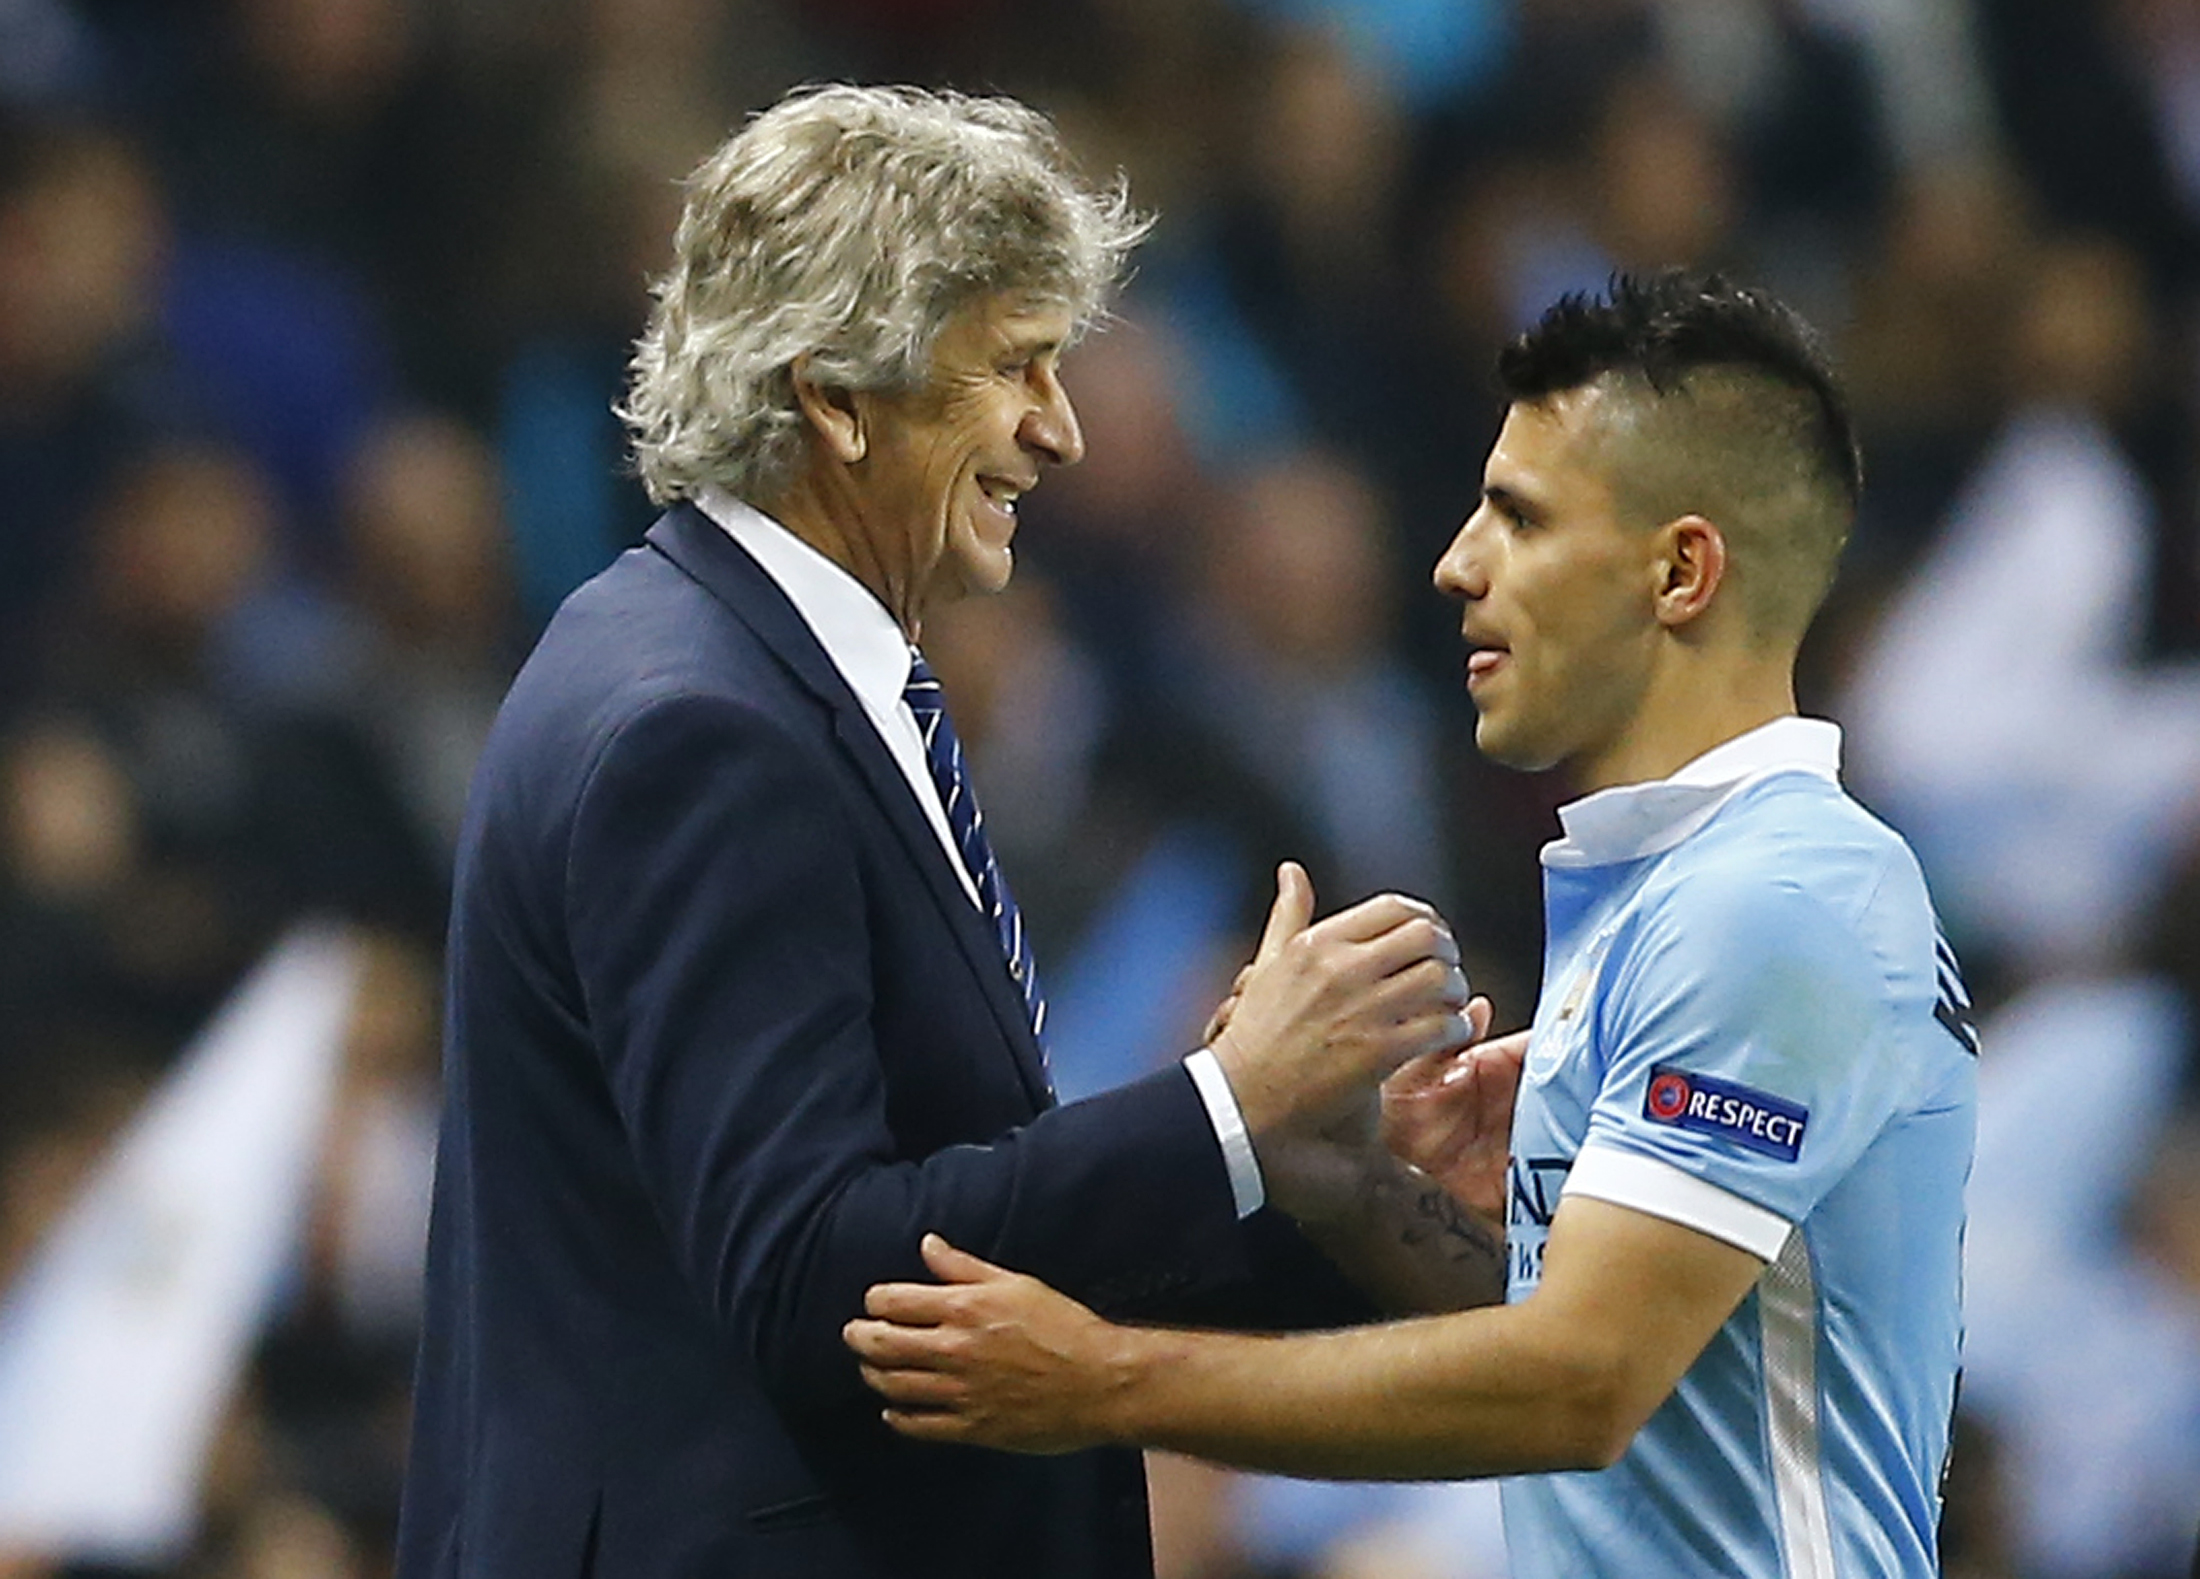 Manchester City bracing themselves to face the best in semis - Aguero